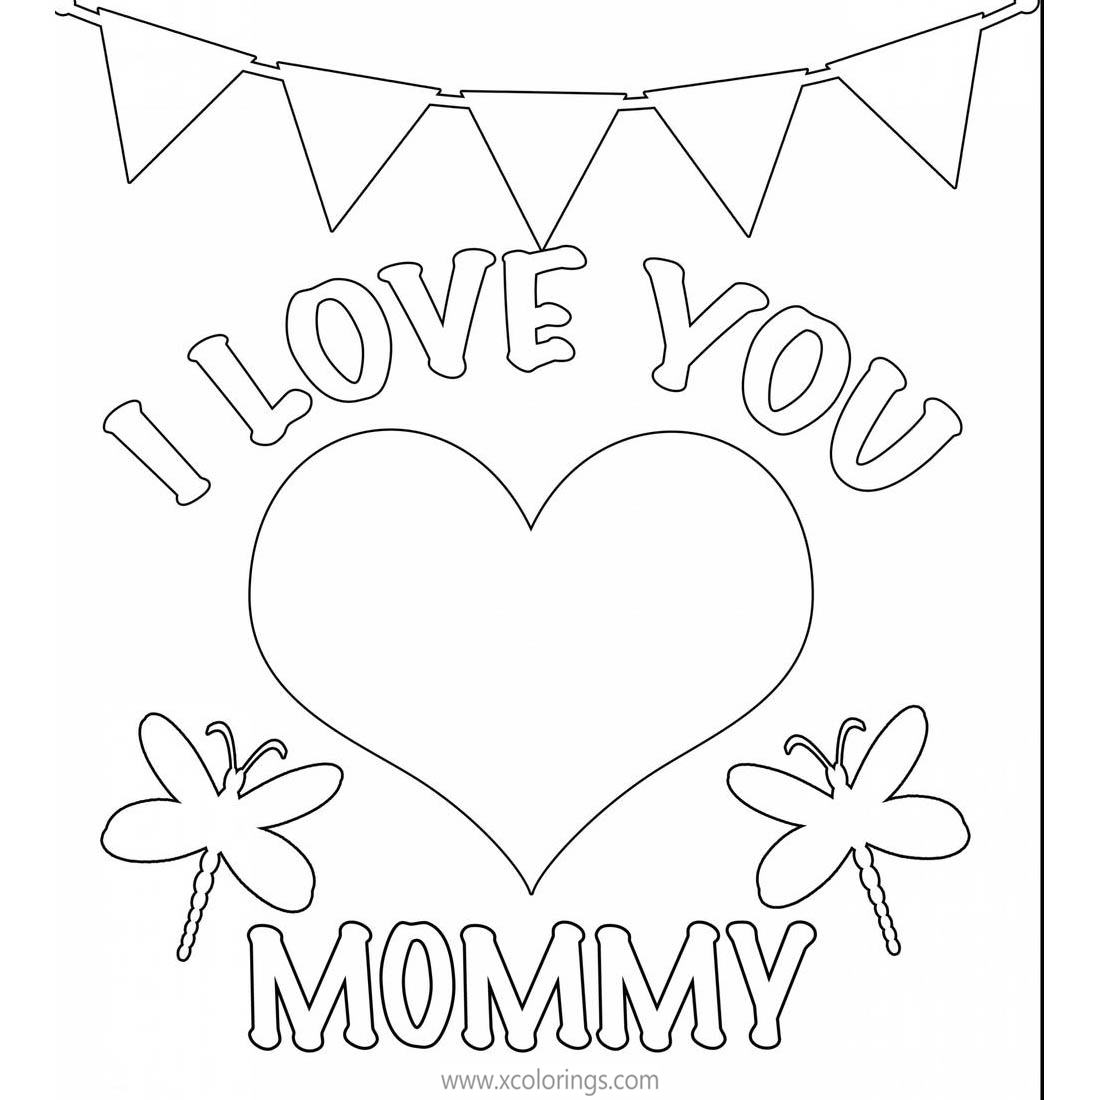 Free Valentines Day Heart Coloring Pages for Mommy printable